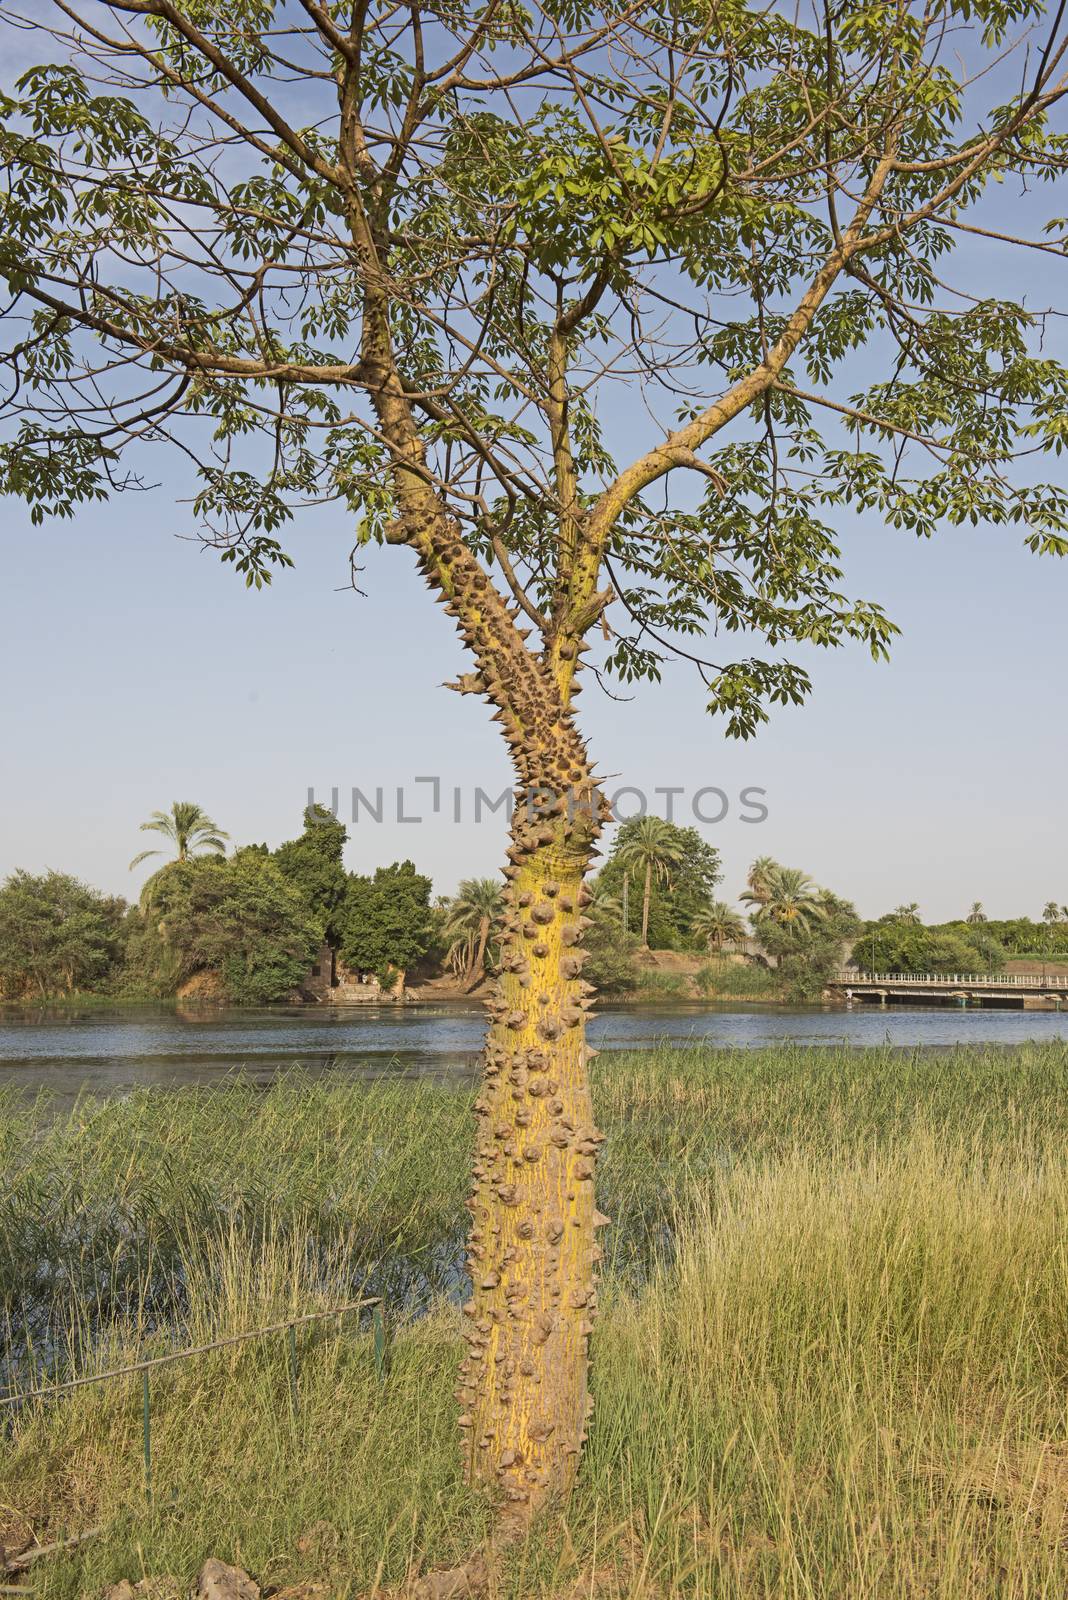 Silk floss tree ceiba speciosa with spiky thorns and leafy canopy growing in meadow on bank of large african river landscape